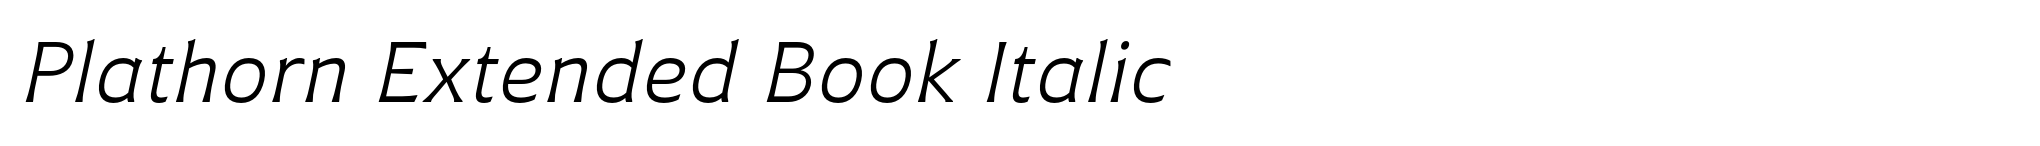 Plathorn Extended Book Italic image